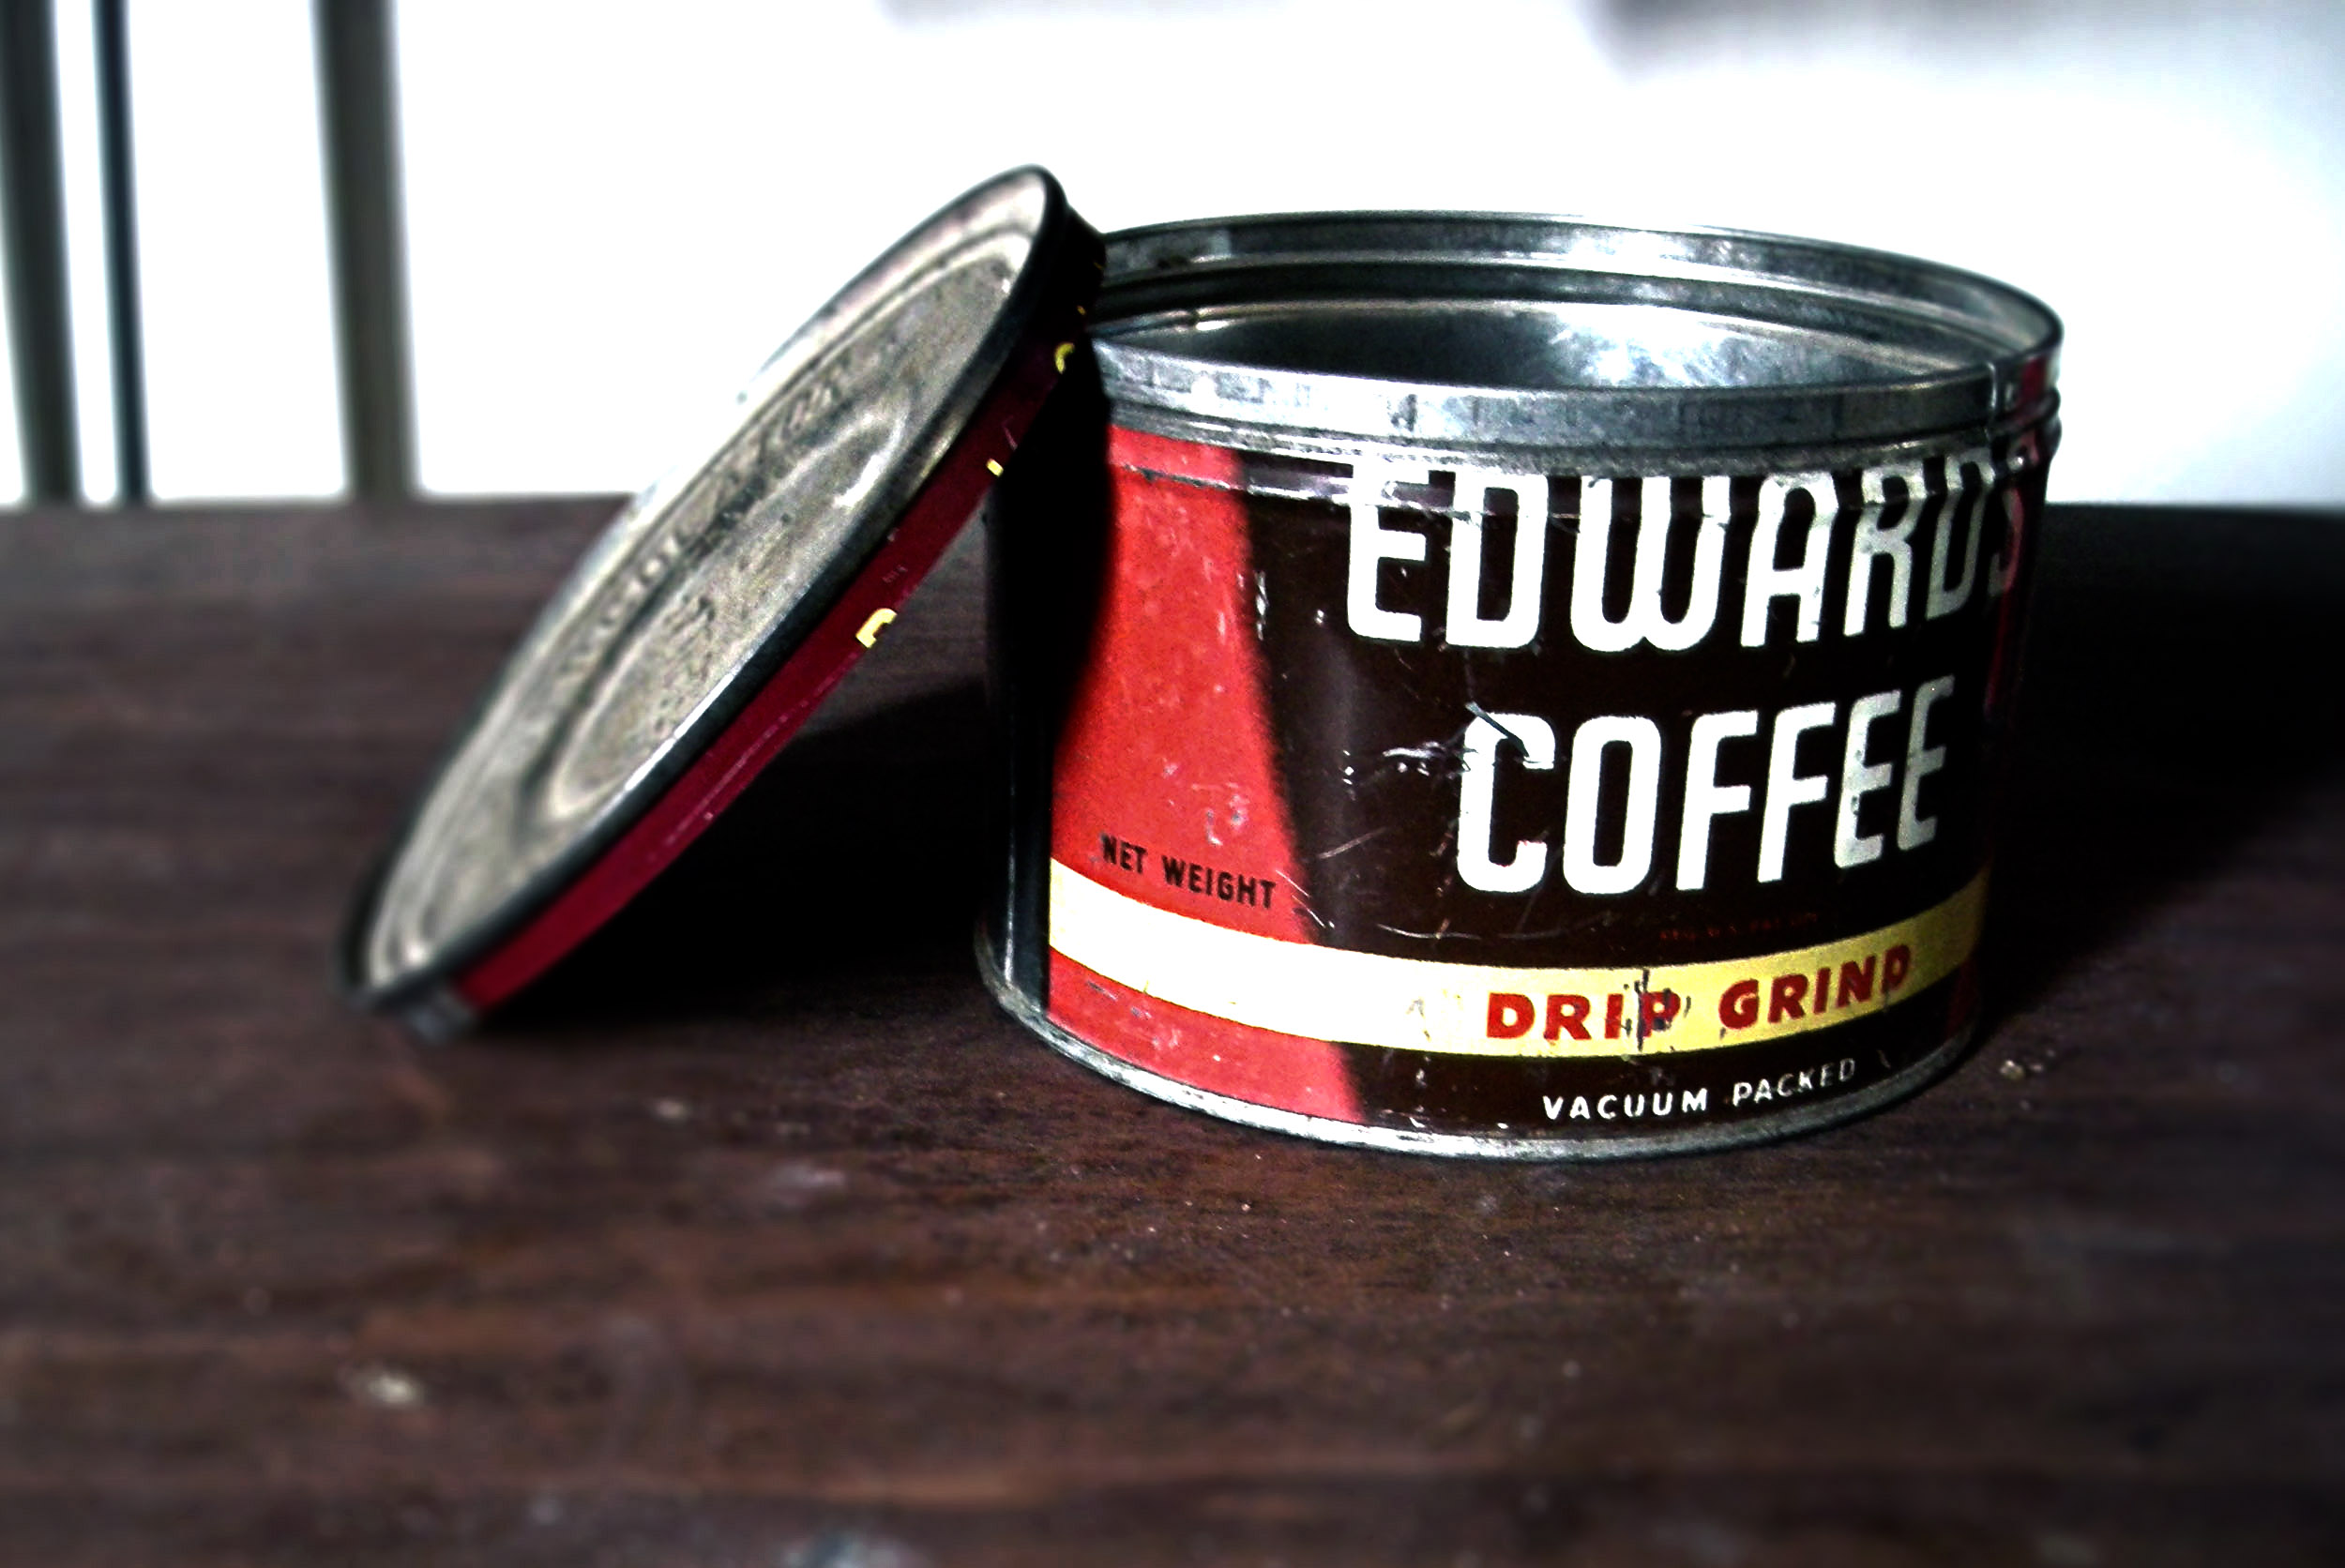 Antique coffee can photo